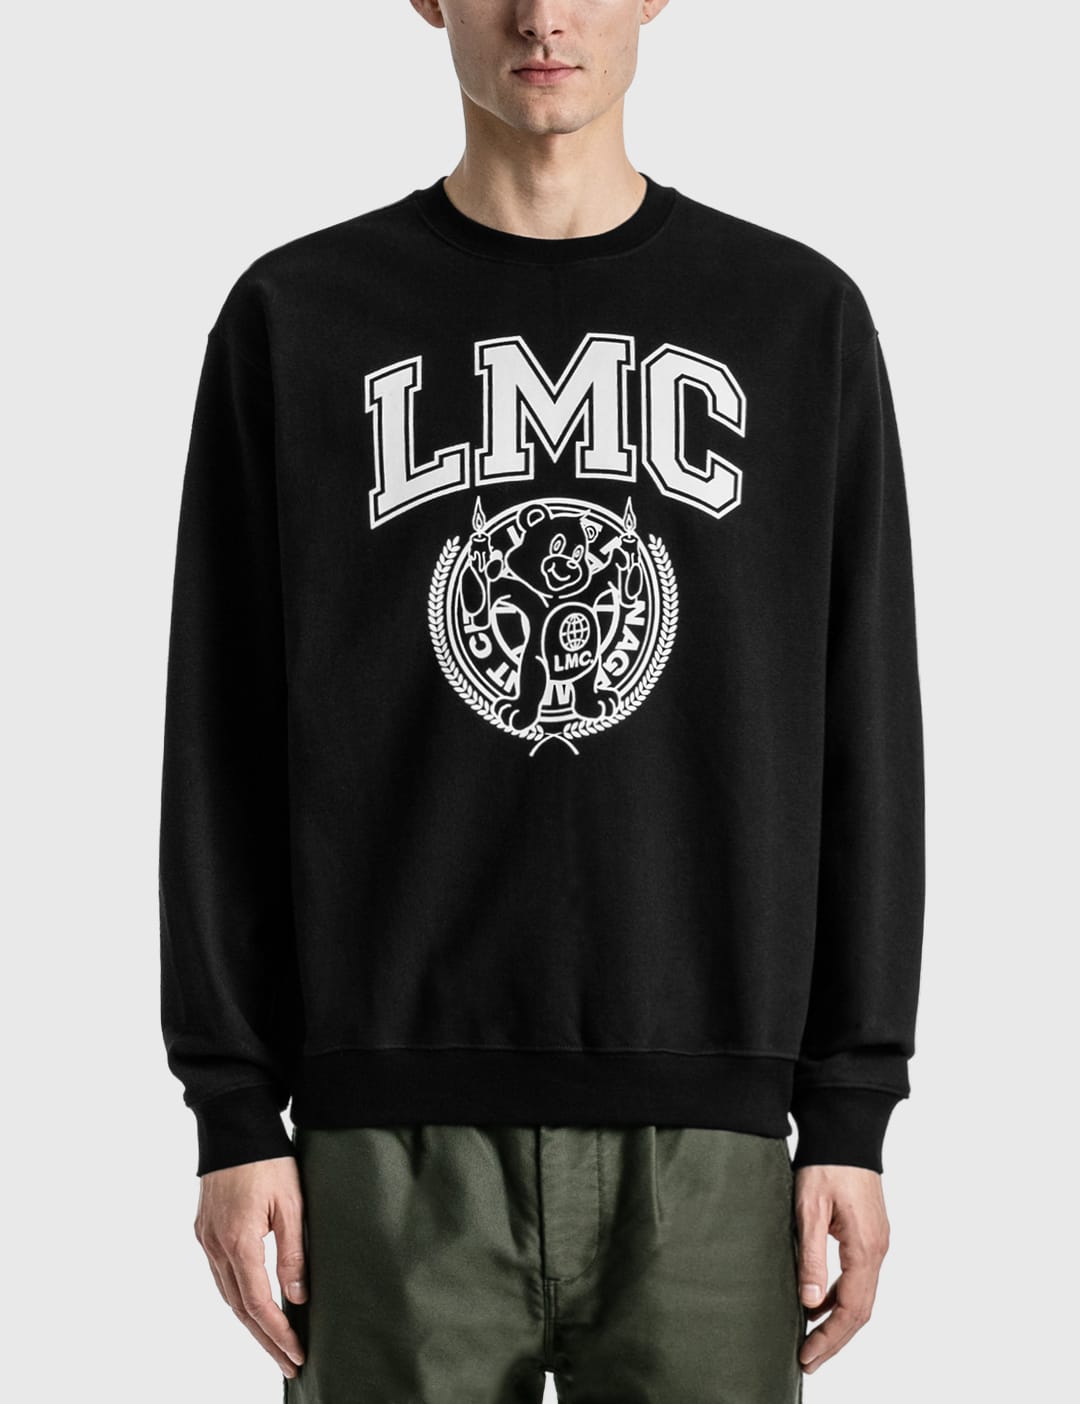 LMC | HBX - Globally Curated Fashion and Lifestyle by Hypebeast